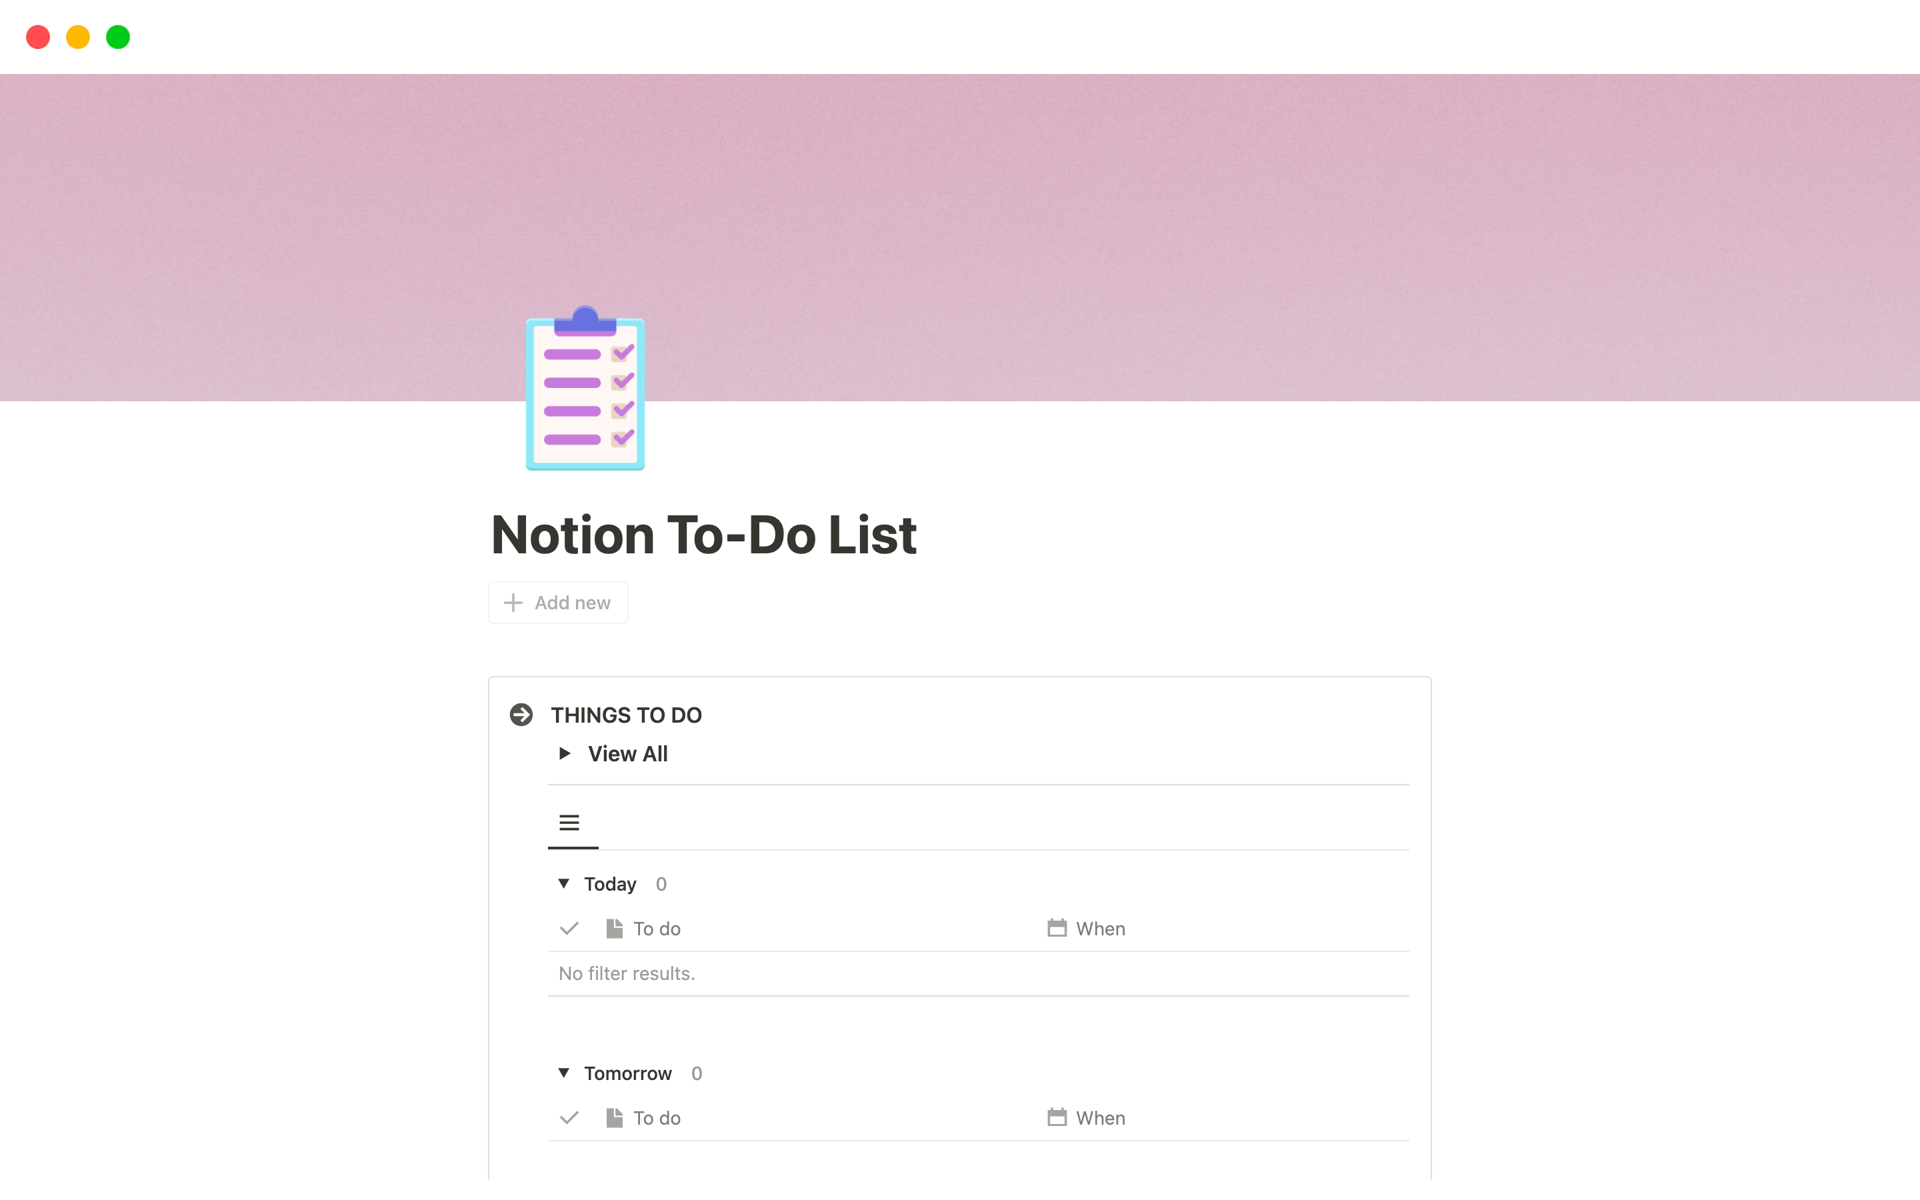 A simple and easy-to-use Notion template for managing your to-do lists.